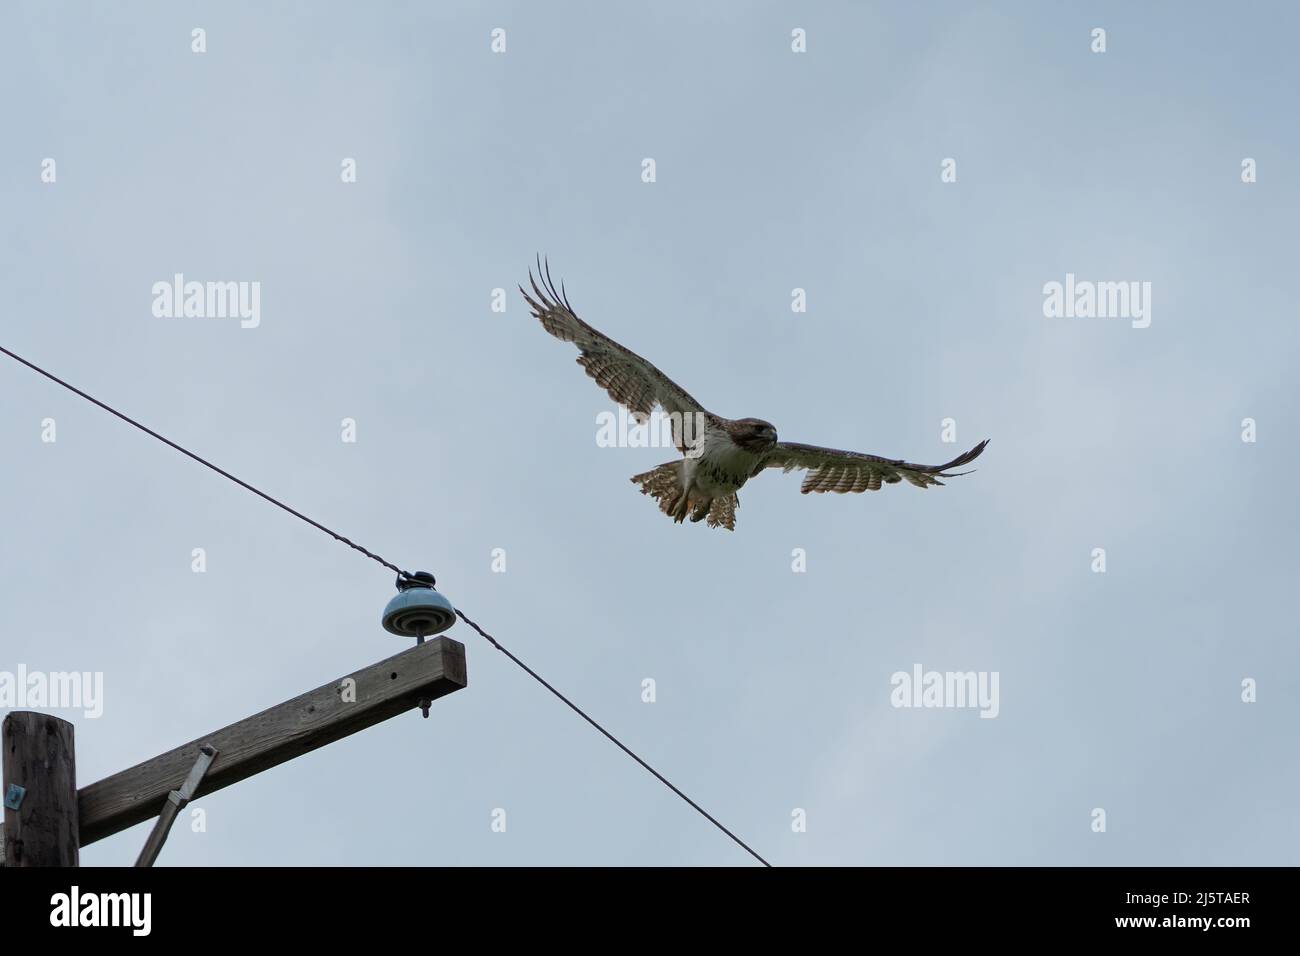 A molting Red-tailed Hawk with missing feathers and gaps in its wing plumage taking flight from the top of a power pole. Stock Photo